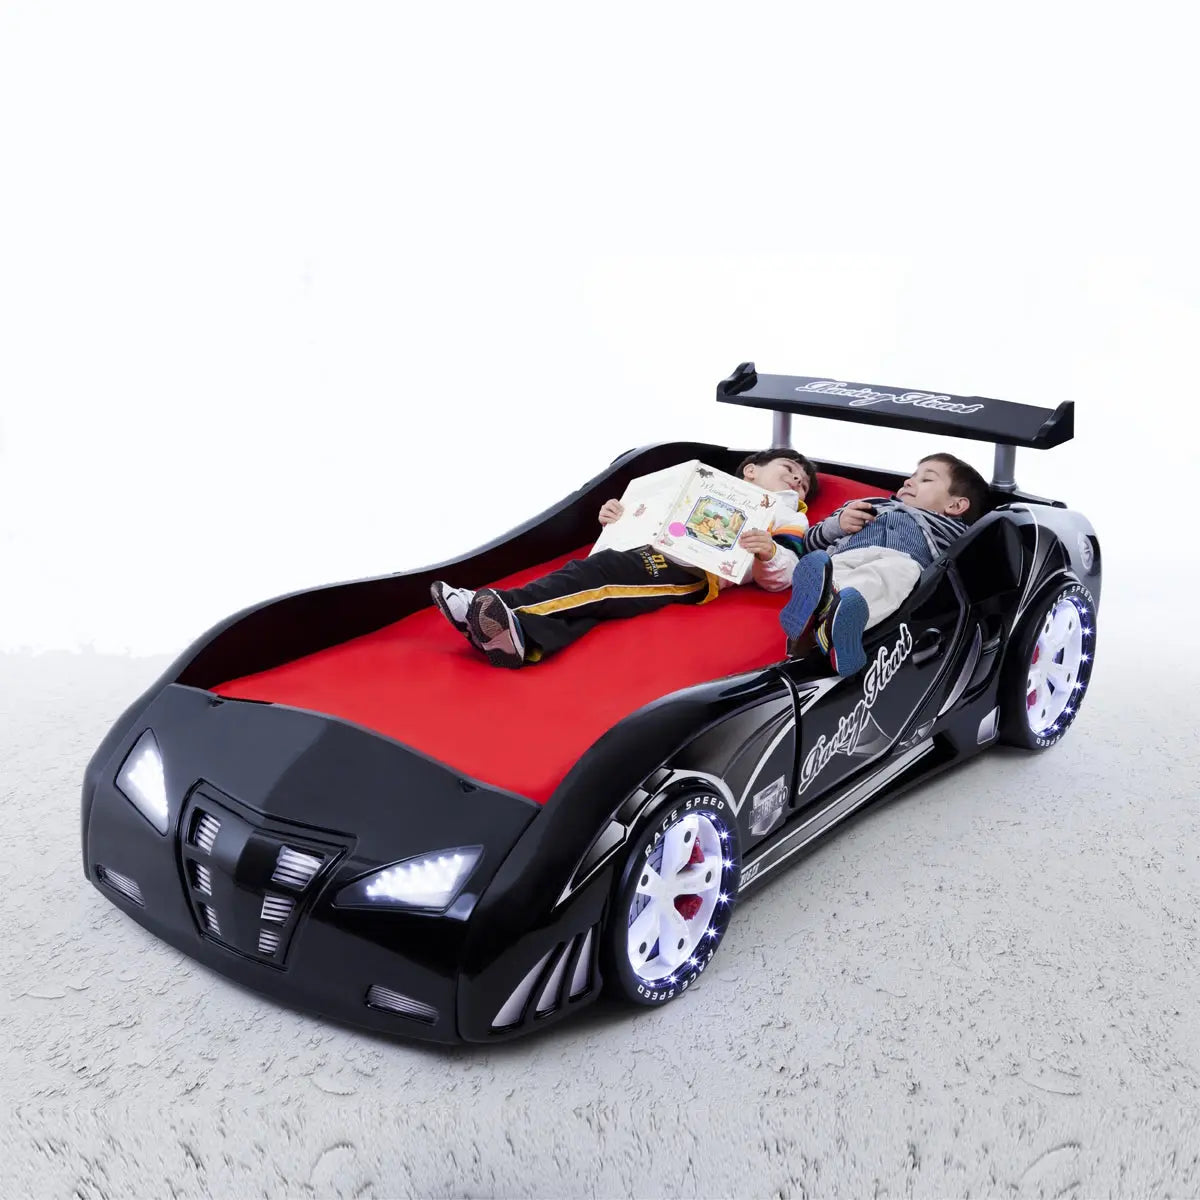 files/M3-Infiniti-Race-Car-Bed-for-Kids-w-LEDs_-Sound-effects-and-Free-Mattress-CaKidsRoom-1686084236_1200x1200_cf313dd6-17d7-471b-a2e3-a0448d6ac9f5.webp